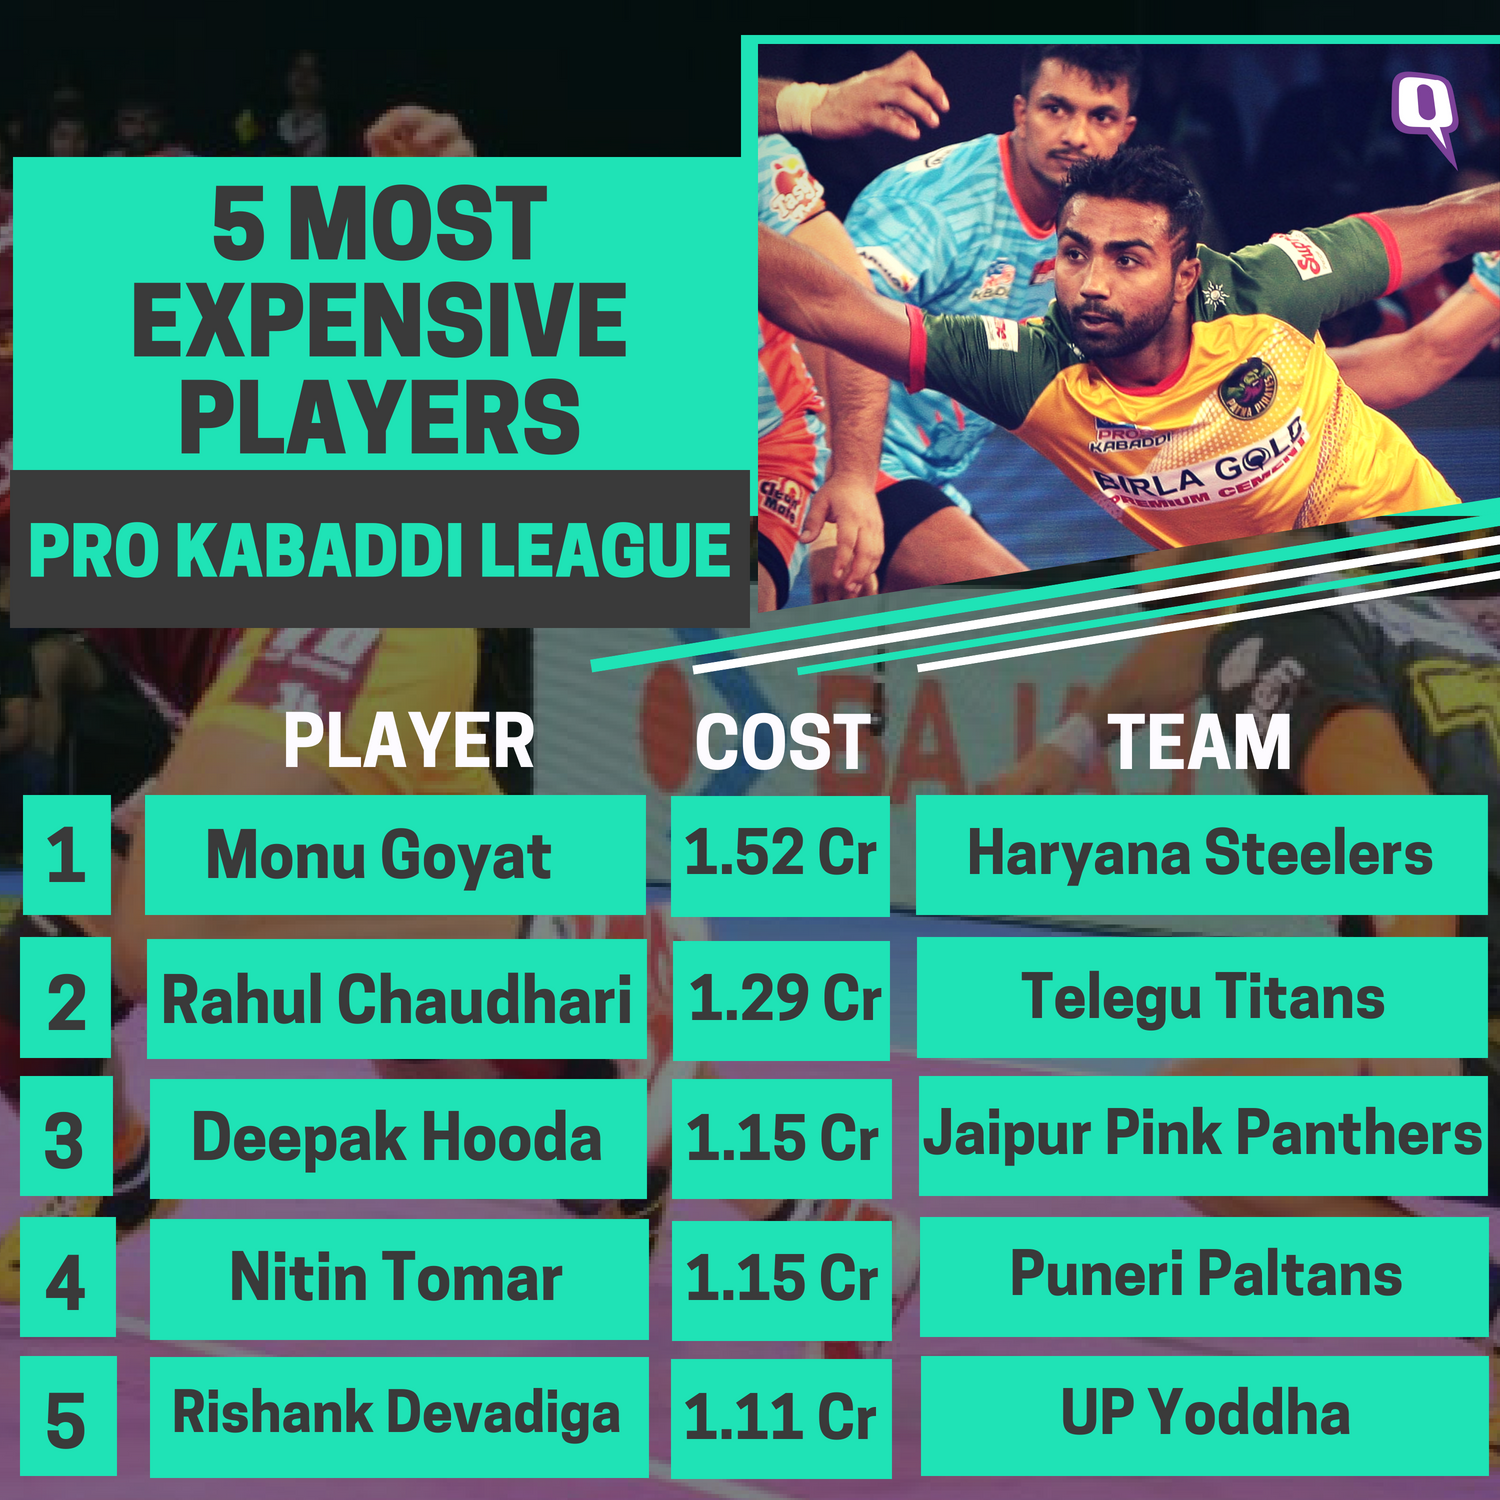 The Rs 1 Crore Barrier Was Broken For The First Time - Pkl 2019 Pro Kabaddi 2019 Auction , HD Wallpaper & Backgrounds